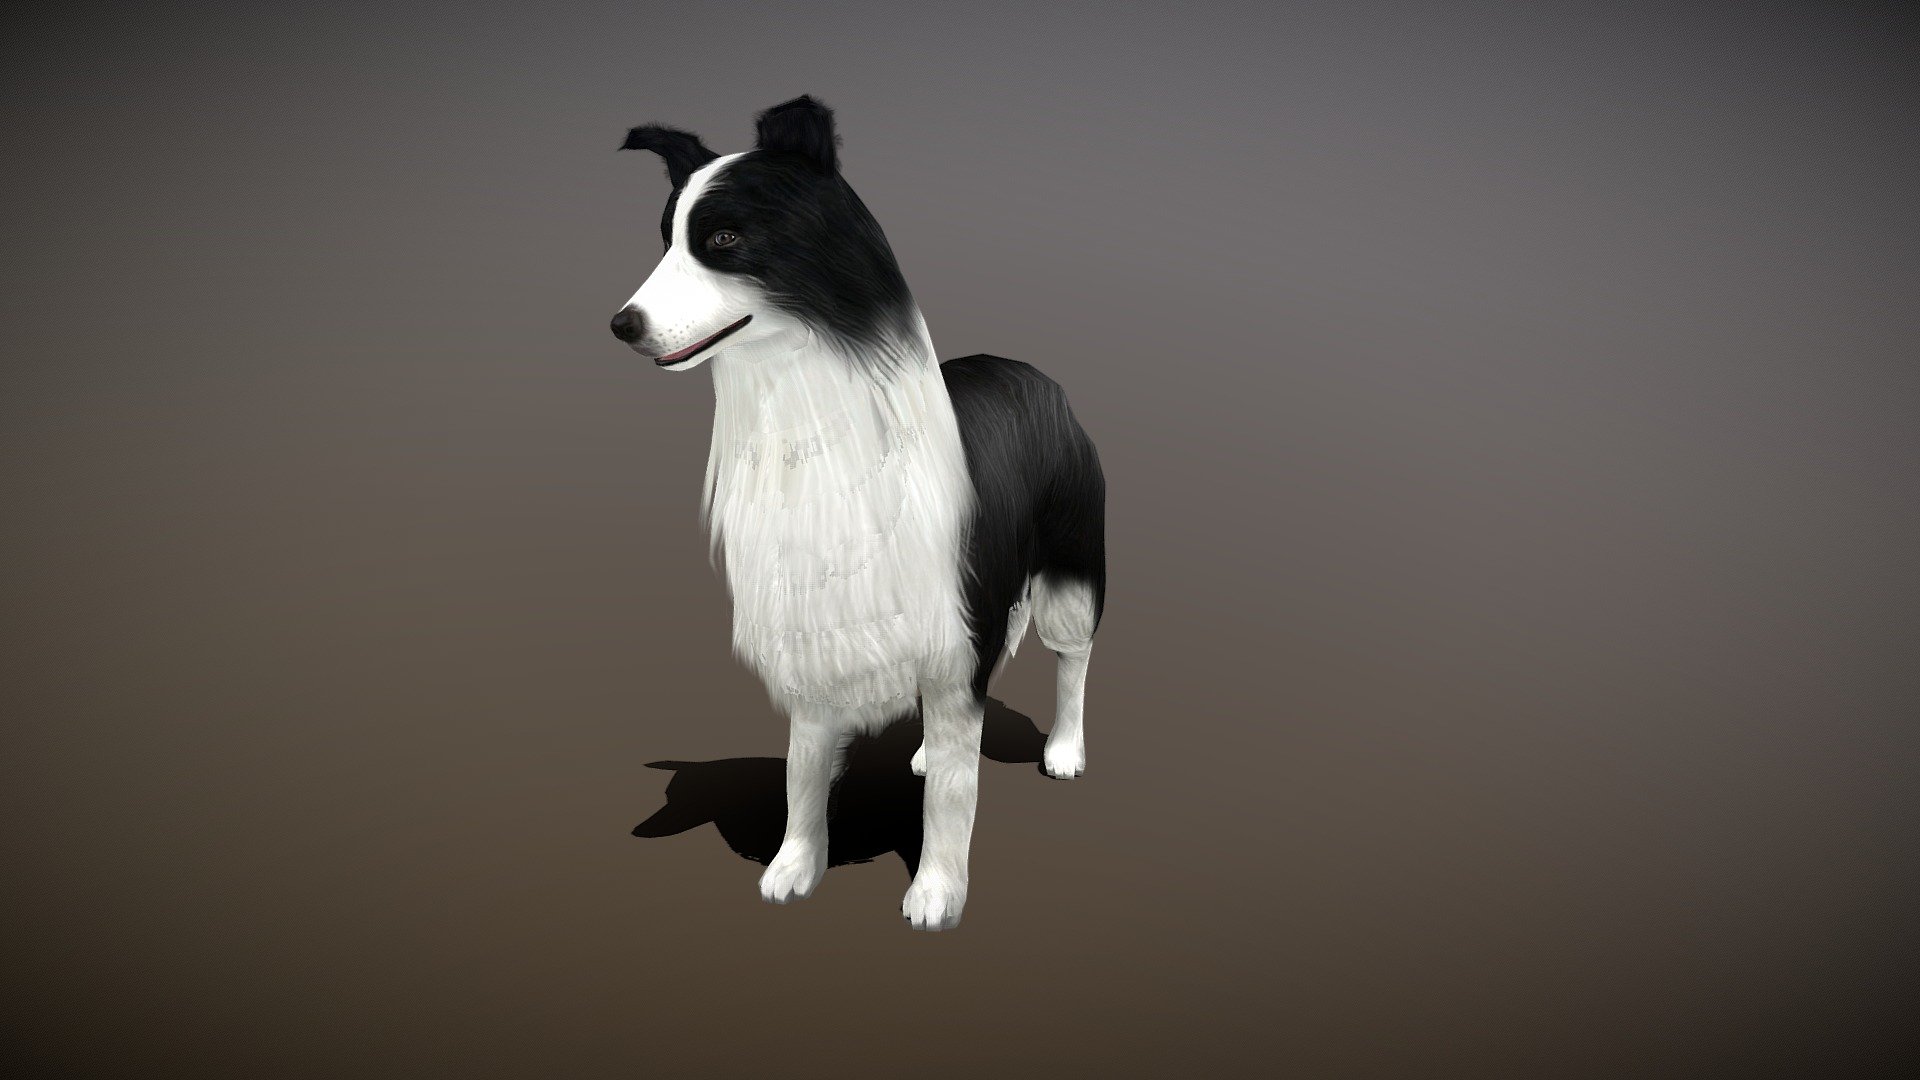 Watch =
Sheep Dog 3d Model

PACKAGE INCLUDE

High quality polygonal model, correctly scaled for an accurate representation of the original object
Model is built to real-world scale
Many different format like blender, fbx, obj, iclone, dae
3d print ready
Ready for animation
Loopable seperate Animation
High Quality materials and textures
Triangles = 3872
Vertices = 2265
Edges = 6109
Faces = 3872

ANIMATIONS

Idle
Walk
Walk Fast
Run
Eat
Bark
+Many different 3d Print Poses

NOTE

GIVE CREDIT BILAL CREATION PRODUCTION
SUBSCRIBE YOUTUBE CHANNEL = https://www.youtube.com/BilalCreation/playlists
FOLLOW OUR STORE = https://sketchfab.com/bilalcreation/models
LIKE AND GIVE FEEDBACK ON THE MODEL

CONTACT US                 =  https://sites.google.com/view/bilalcreation/contact-us
ORDER  DONATION   =  https://sites.google.com/view/bilalcreation/order - Sheep Dog Animated - Buy Royalty Free 3D model by Bilal Creation Production (@bilalcreation) 3d model